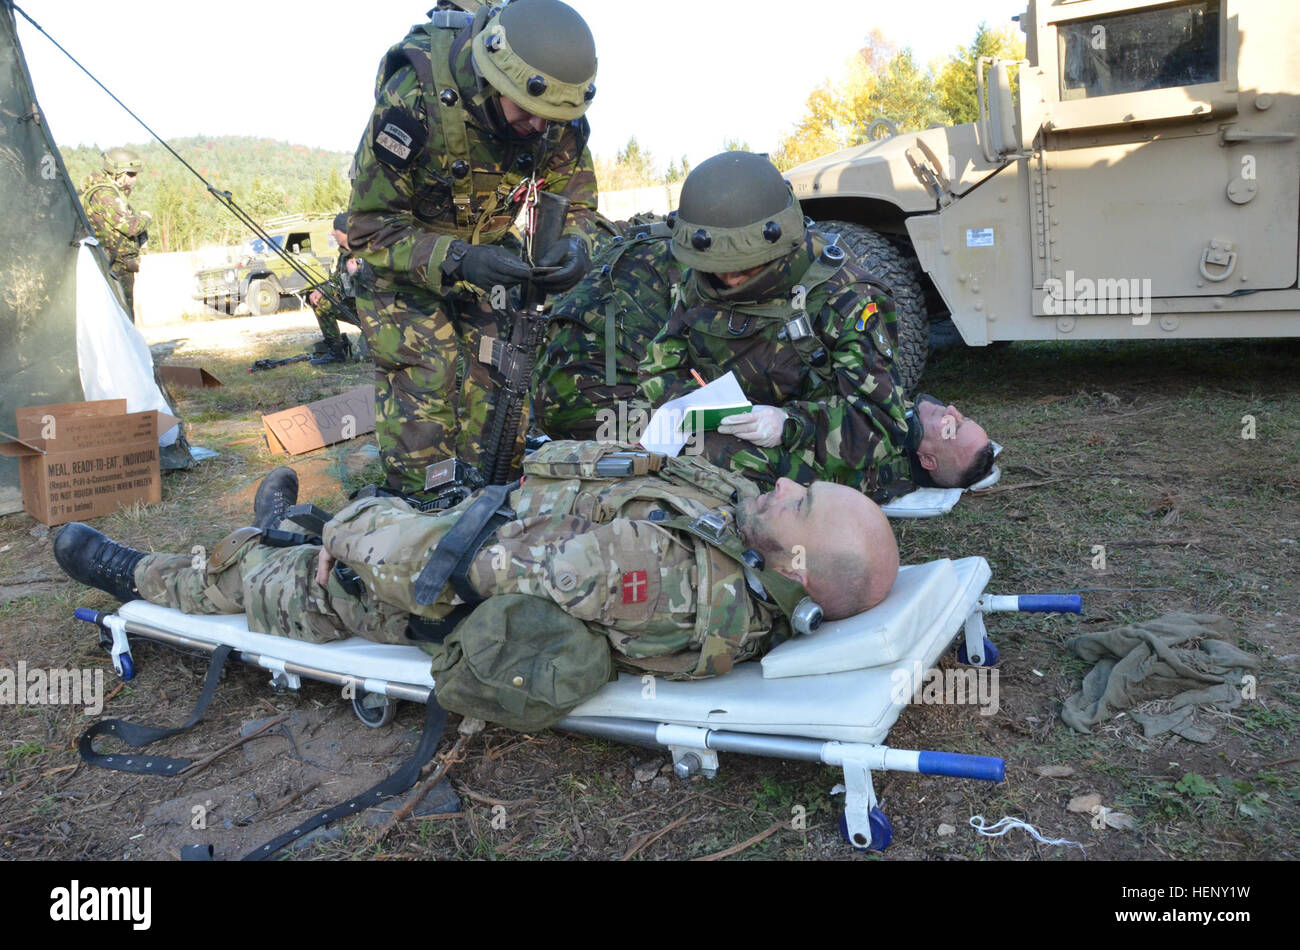 Romanian soldiers of the 21st Mountain Troops Battalion, 2nd Mountain Troops Brigade, 1st Infantry Division, fill out a 9-Line medical evacuation request form during exercise Combined Resolve III at the Joint Multinational Readiness Center in Hohenfels, Germany, Nov. 3, 2014.  Combined Resolve III is a multinational exercise, which includes more than 4,000 participants from NATO and partner nations, and is designed to provide a complex training scenario that focuses on multinational unified land operations and reinforces the U.S. commitment to NATO and Europe. (U.S. Army photo by Pv2. Courtney Stock Photo